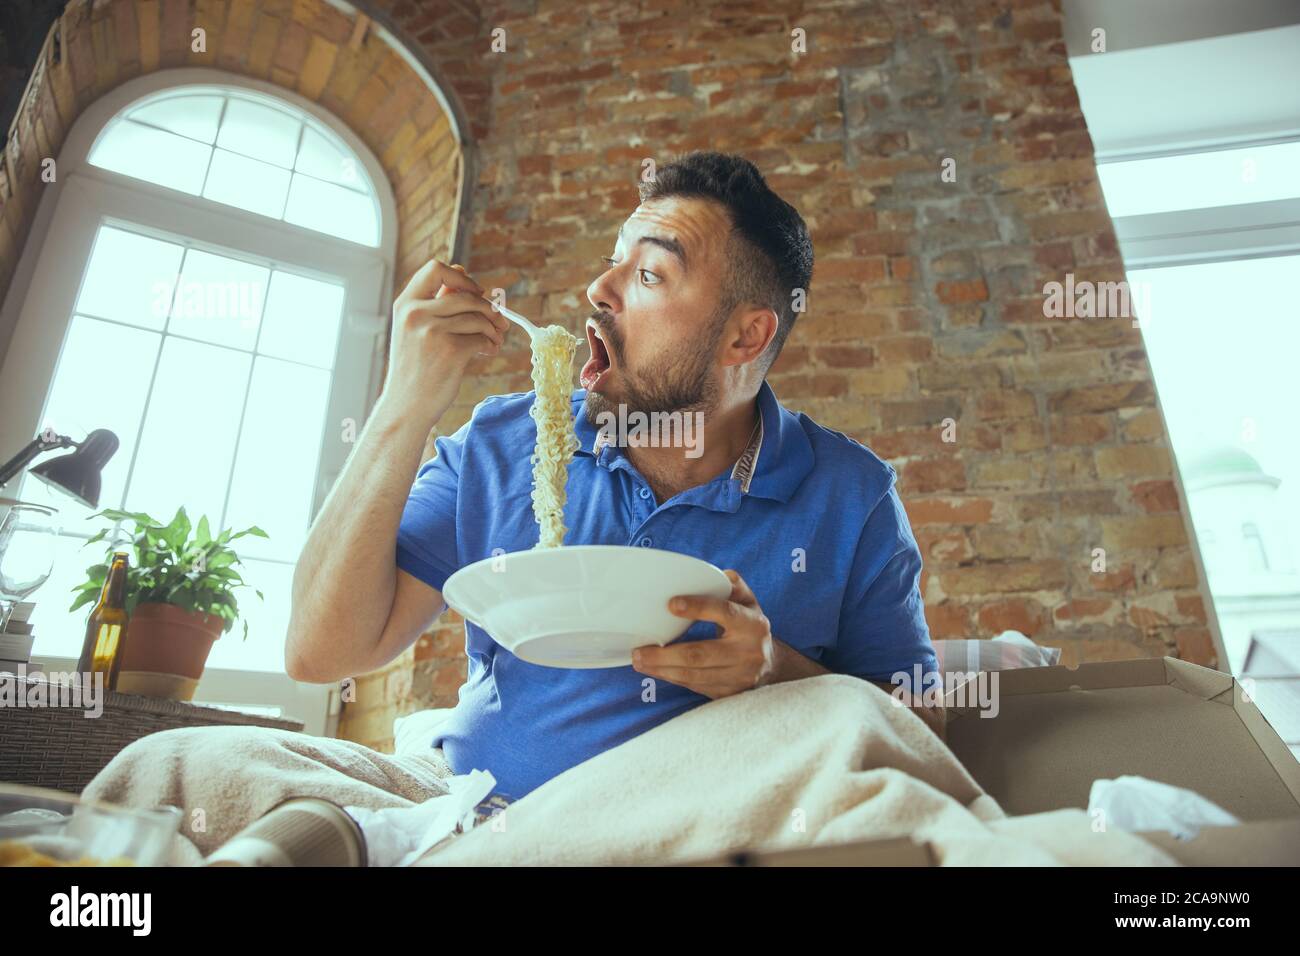 Passioned eating instant noodle. Lazy man living in his bed surrounded with messy. No need to go out to be happy. Using gadgets, watching movie and series, looks emotional. Eating snacks and fast food. Stock Photo